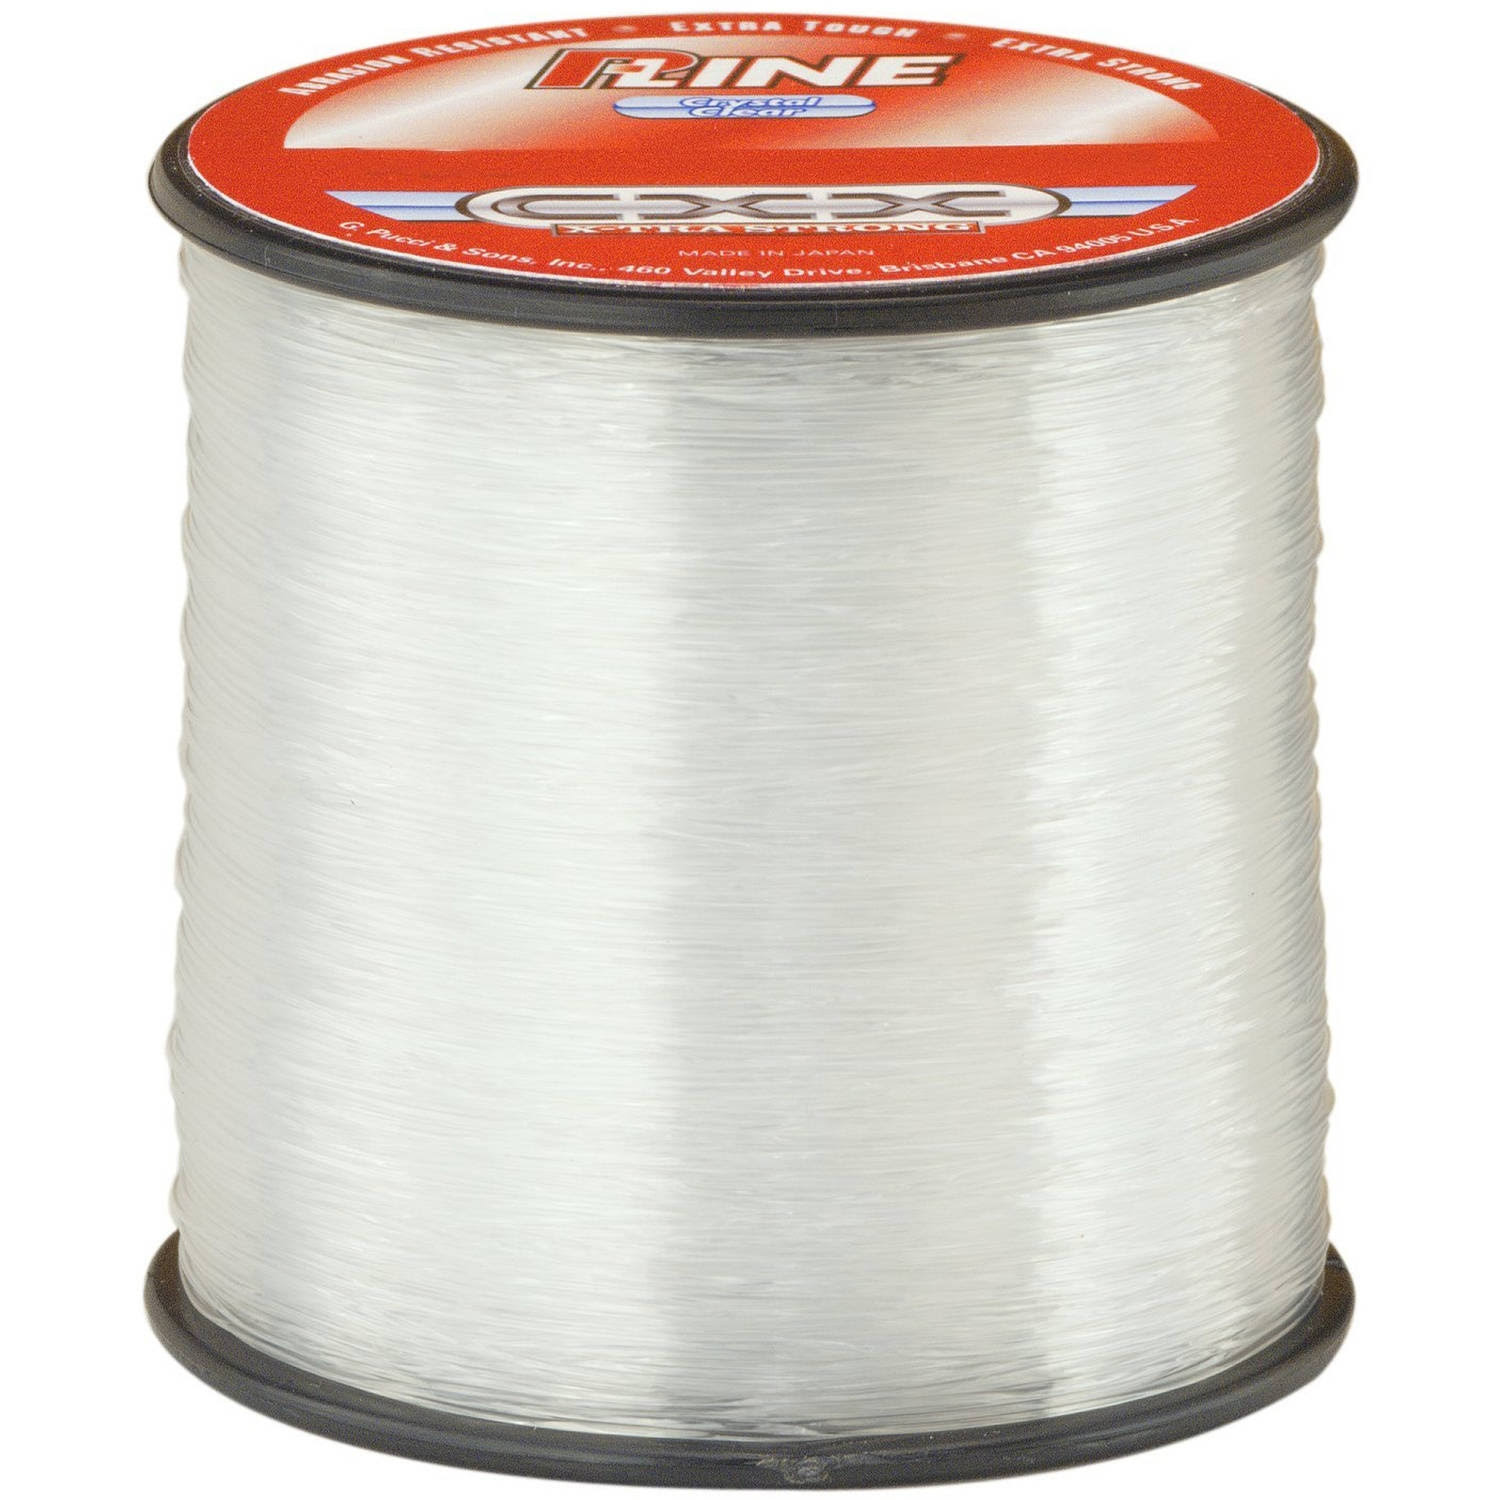 P-Line Cxx-xtra Strong Fishing Line - Crystal Clear, 600yds